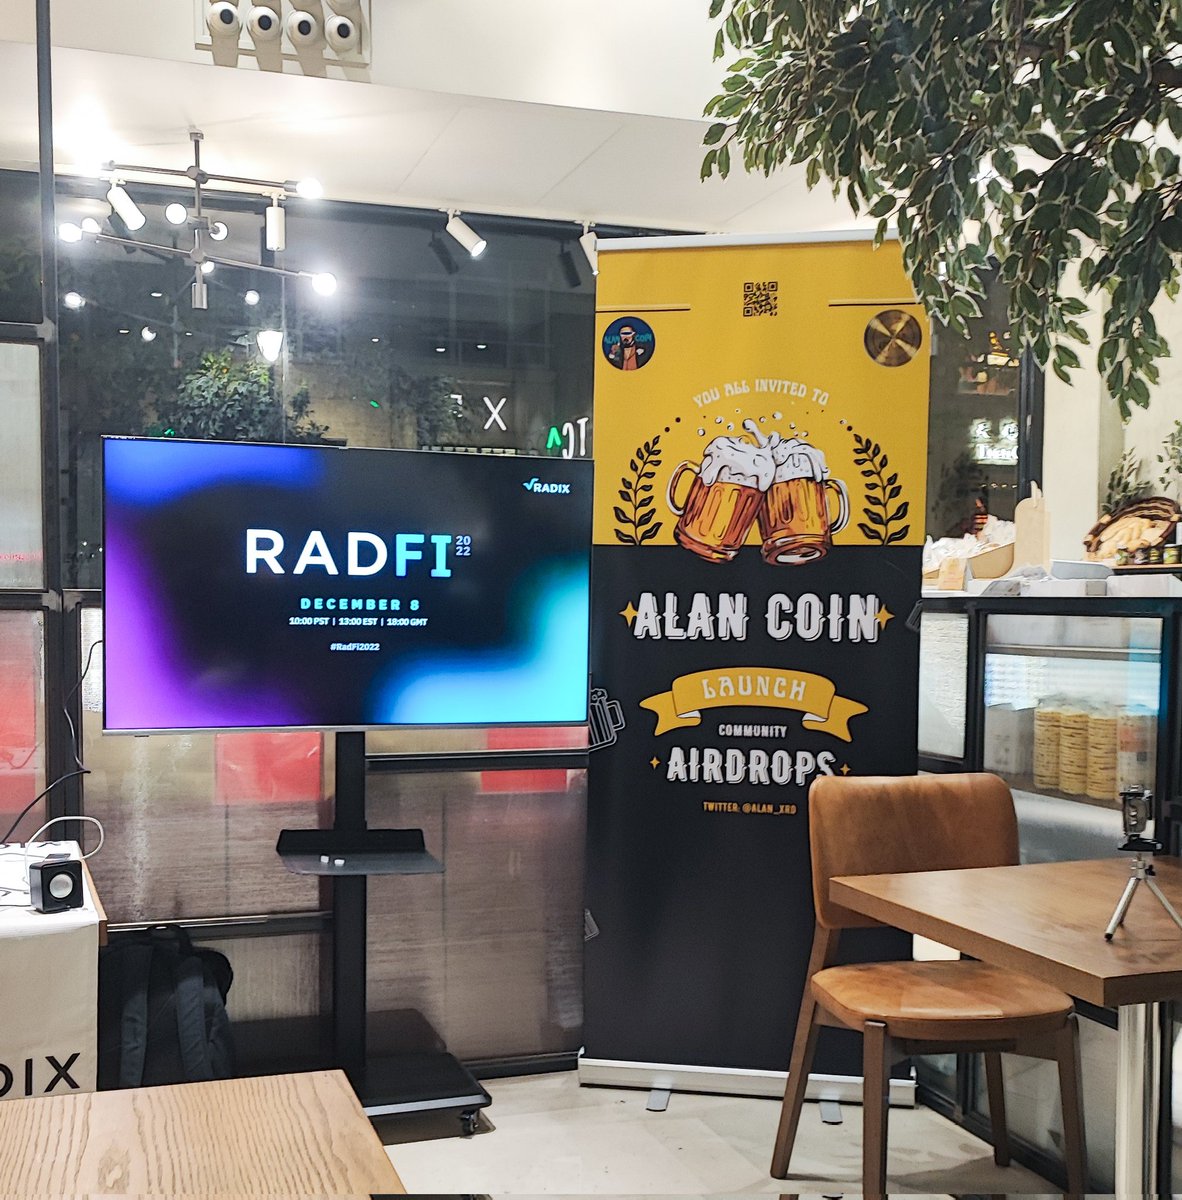 What do you expect more? #RadFi2022 or #AlanBeerProject by @alan_xrd ? $XRD $ALC #LikeAlan